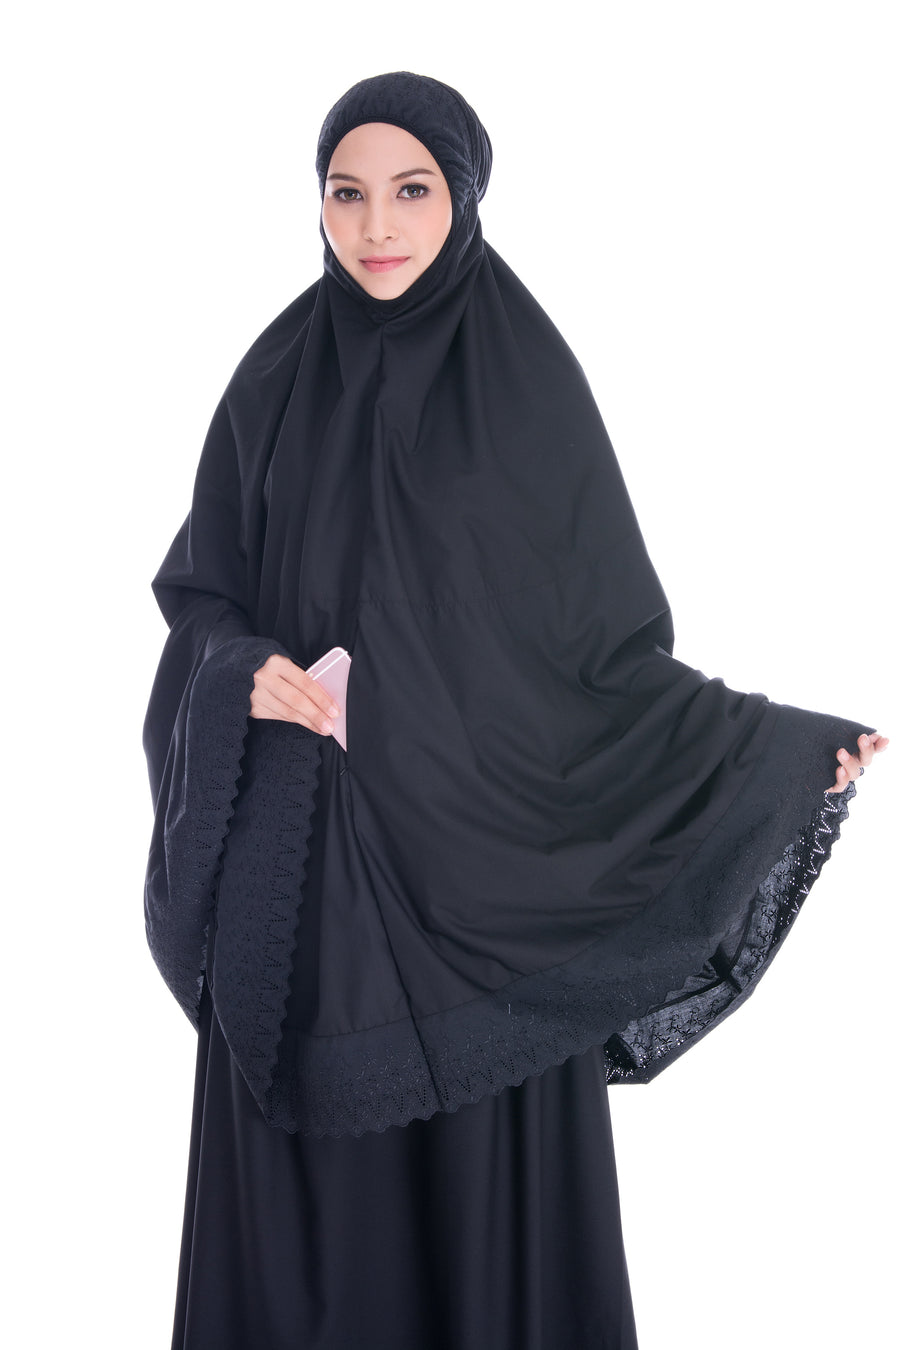 Telekung Cotton Black made with pockets for inserting light stuffs. Its material is cooling and comfortable to be worn.